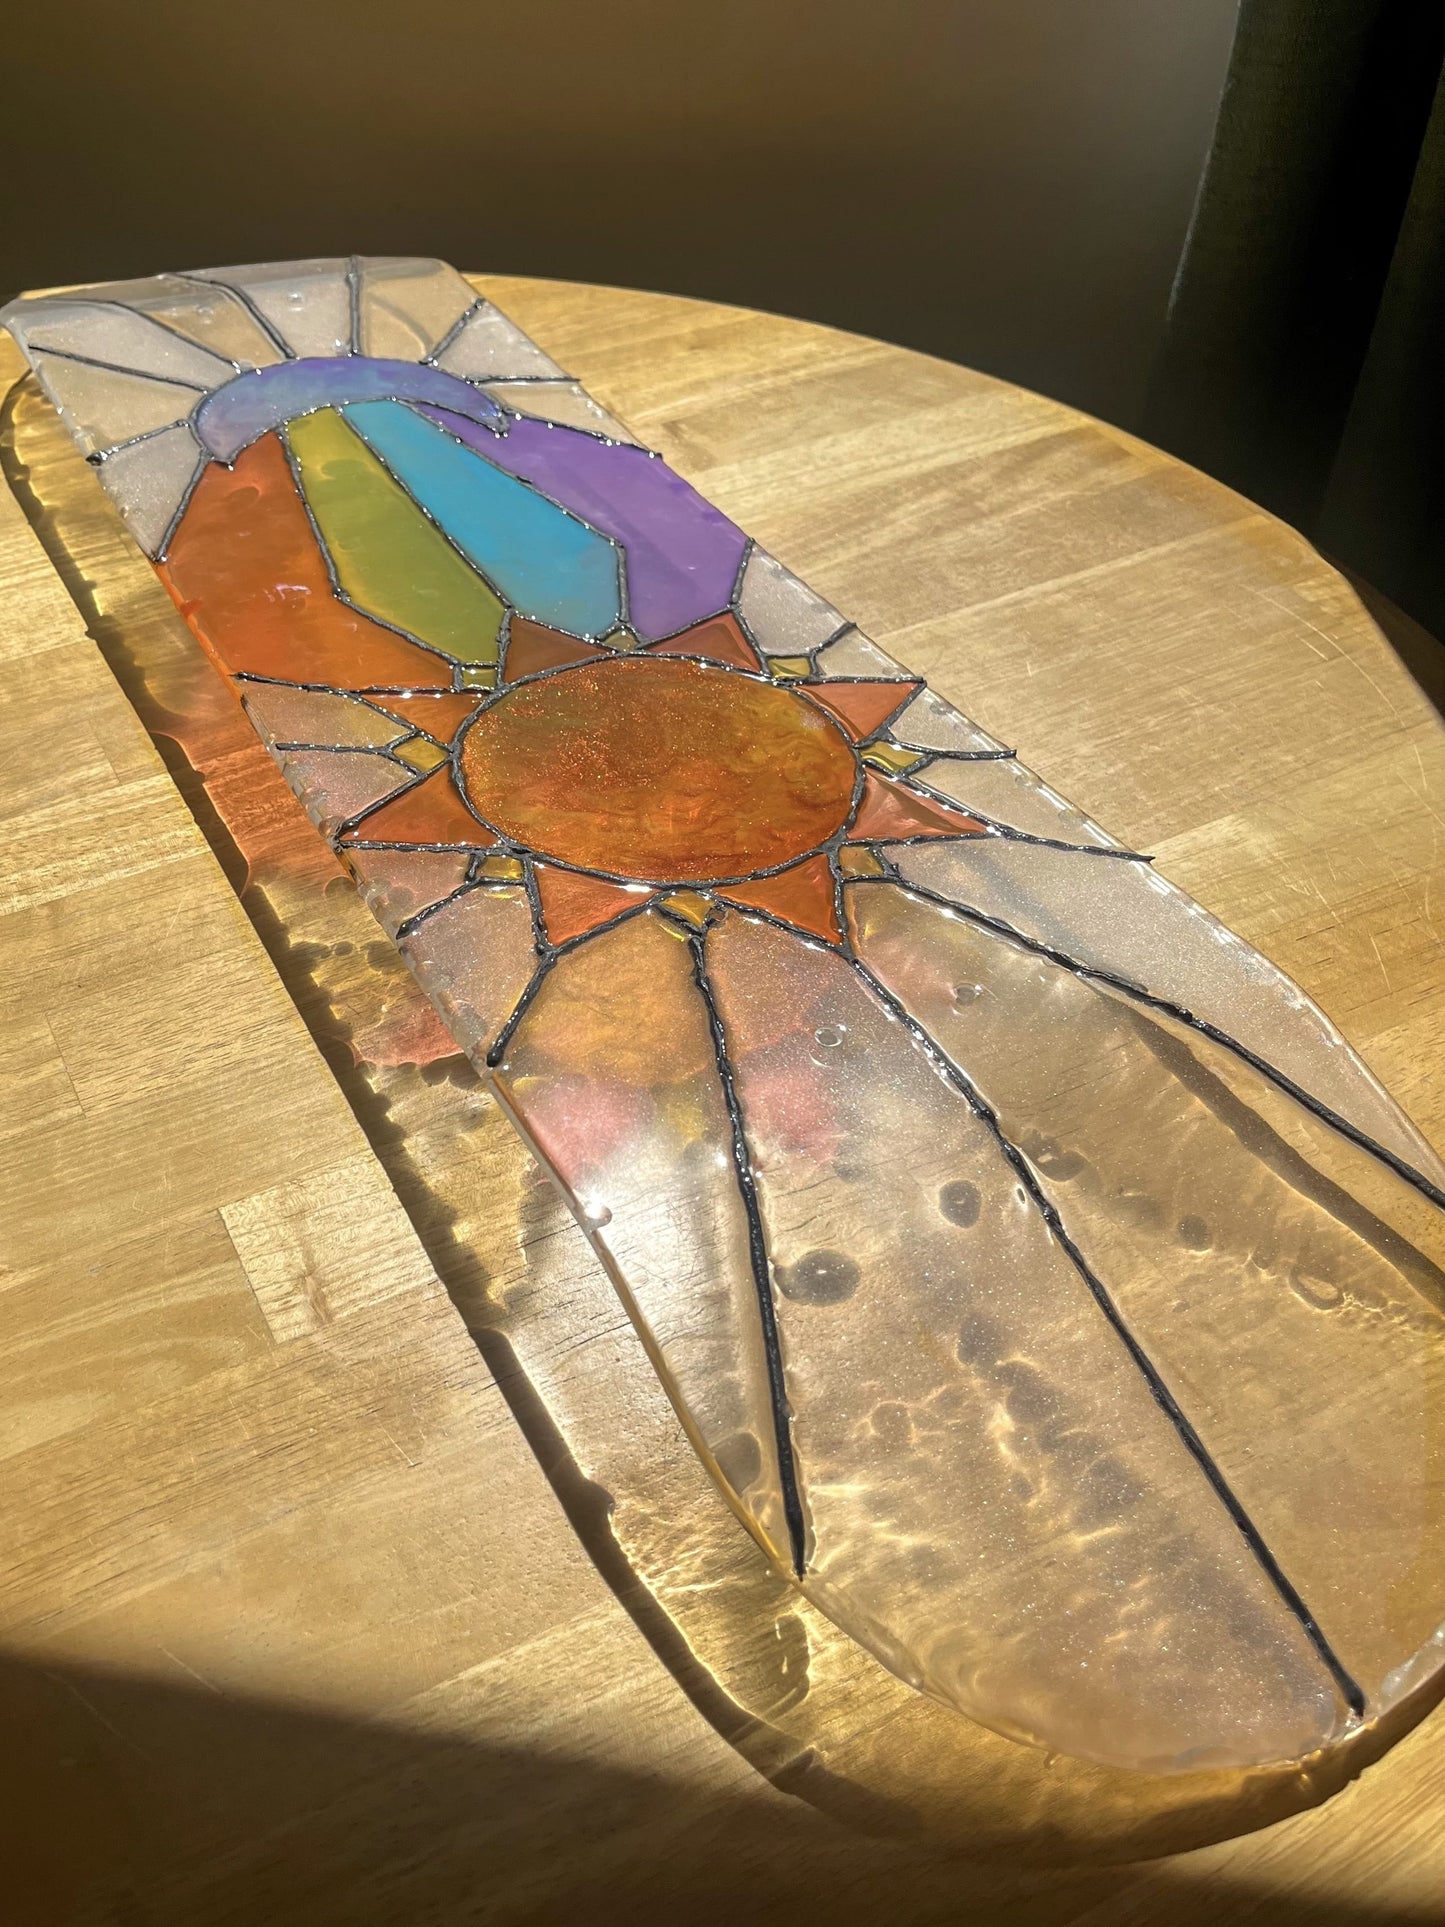 See-through stained glass sun and moon skateboard art on wooden table casting colorful shadow.